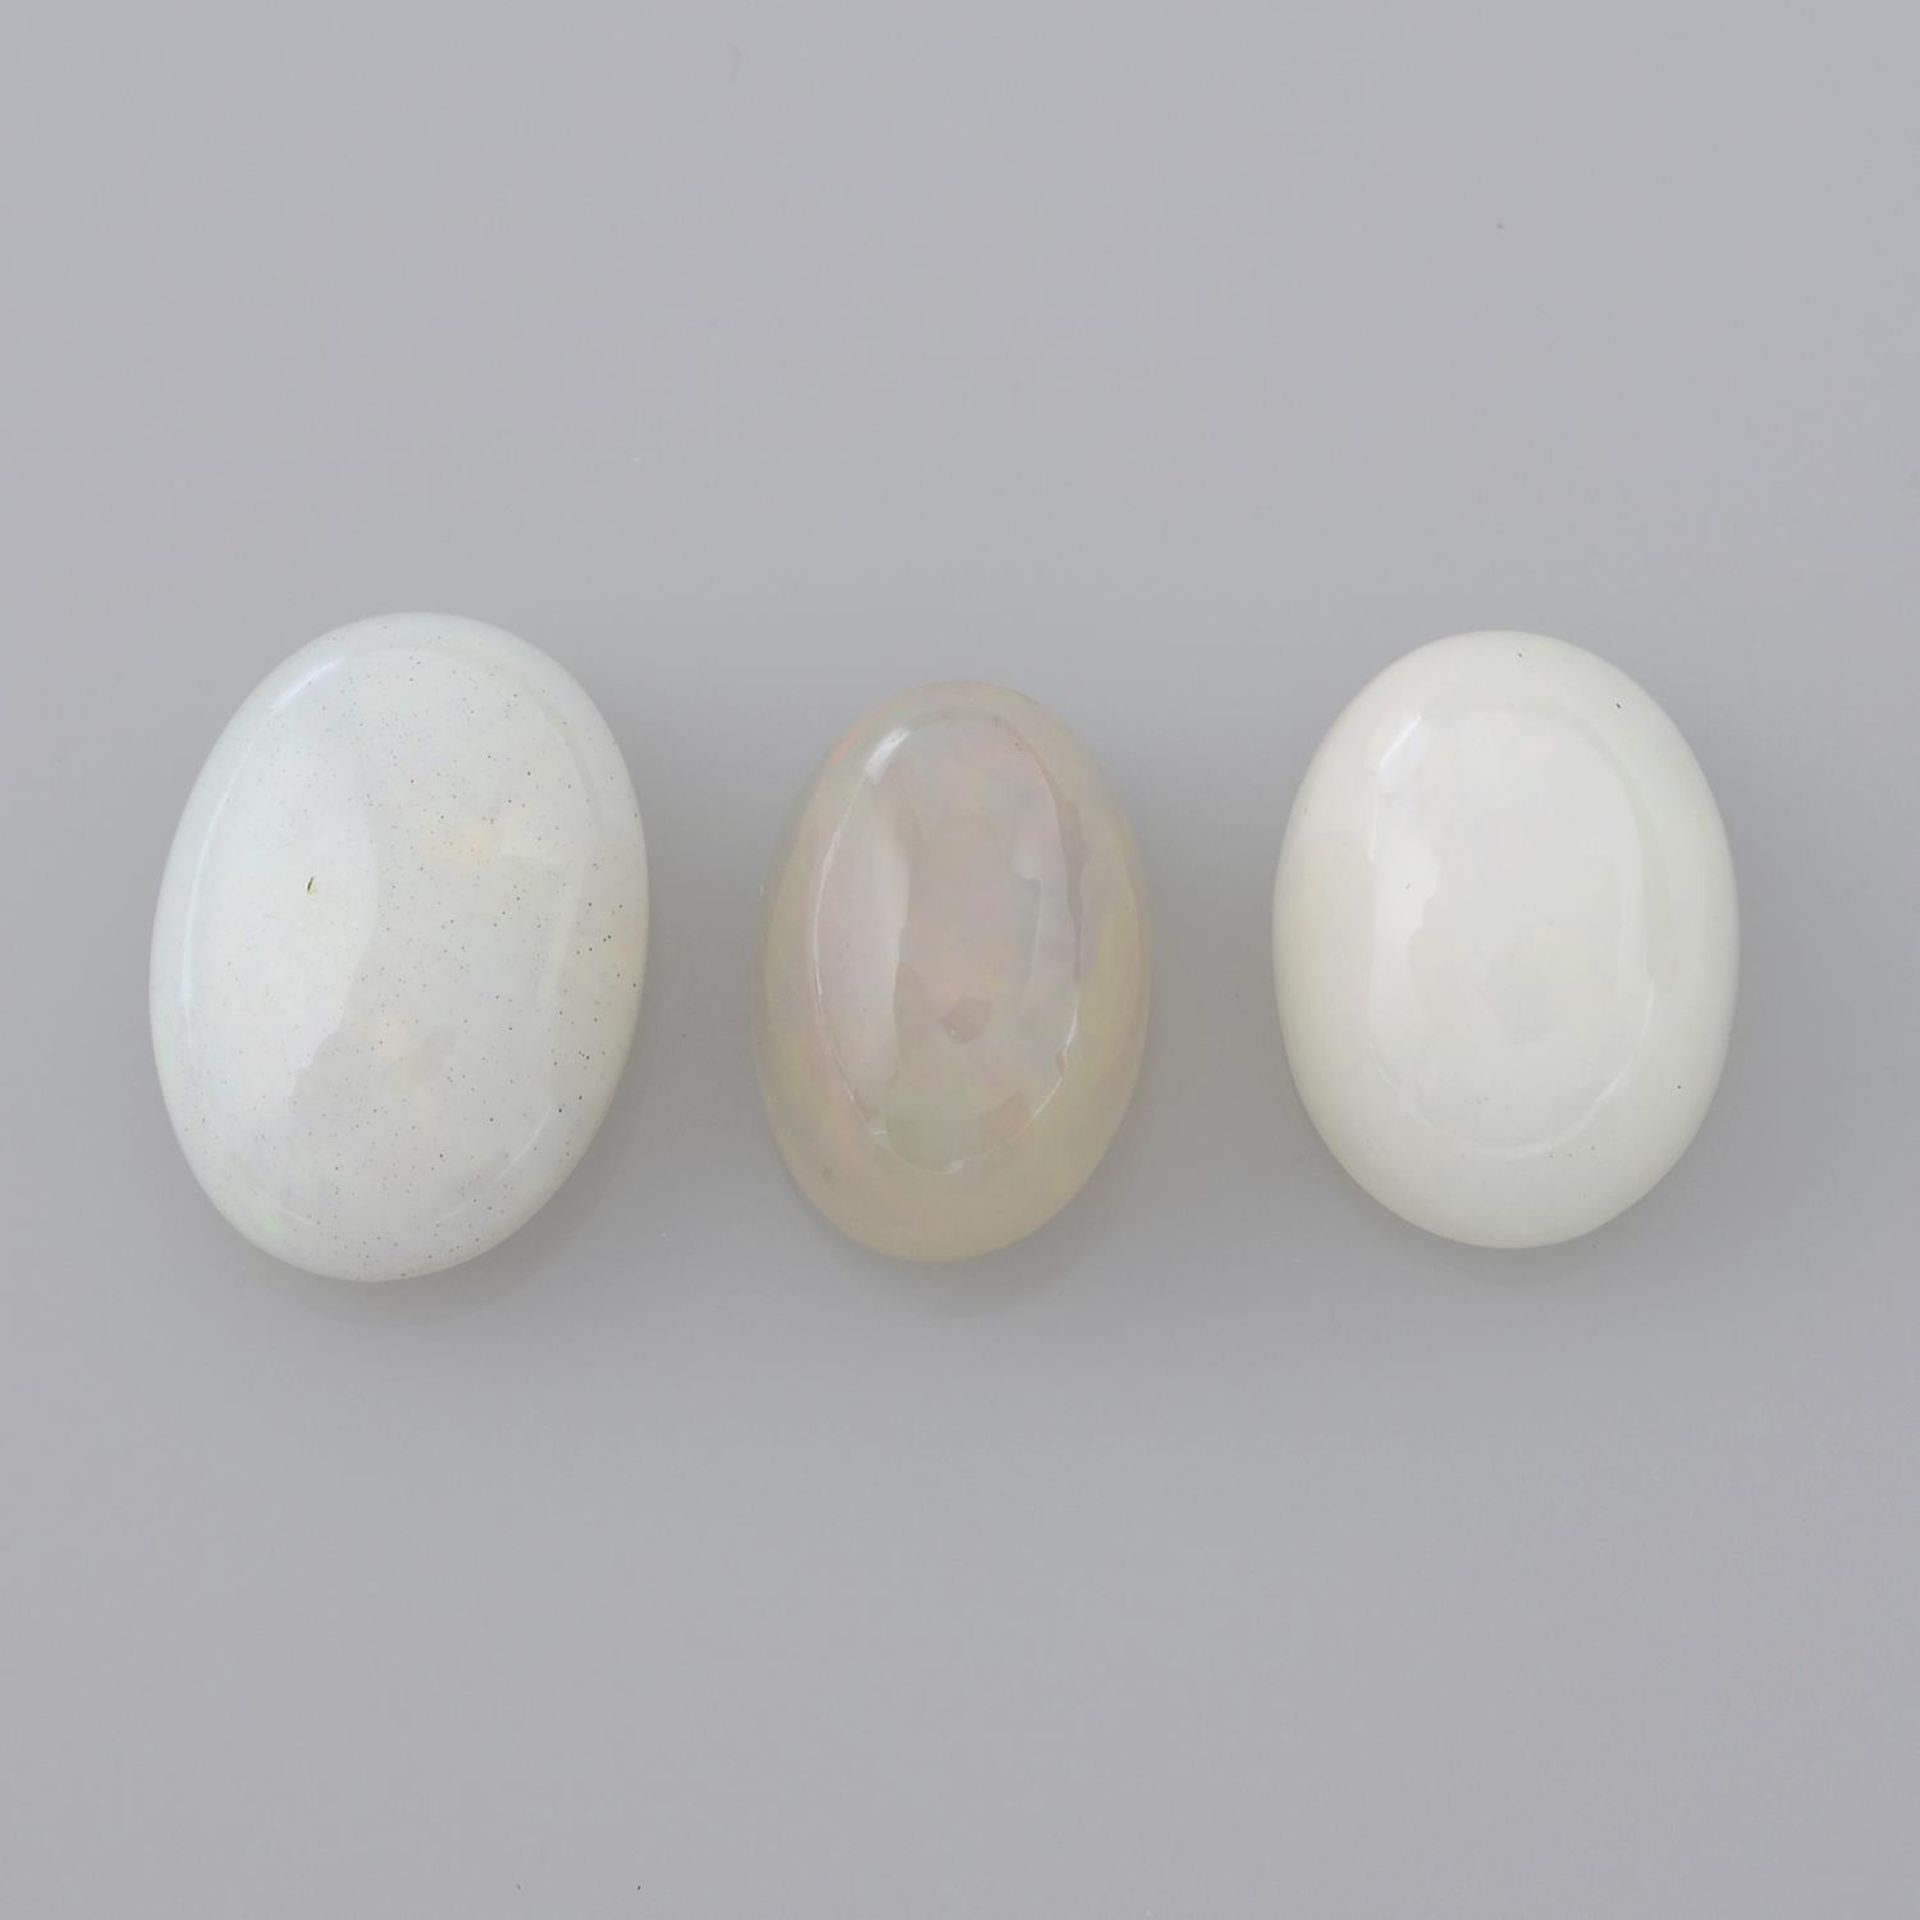 A selection of gemstones, to include six aquamarines, three peridots and three opals.